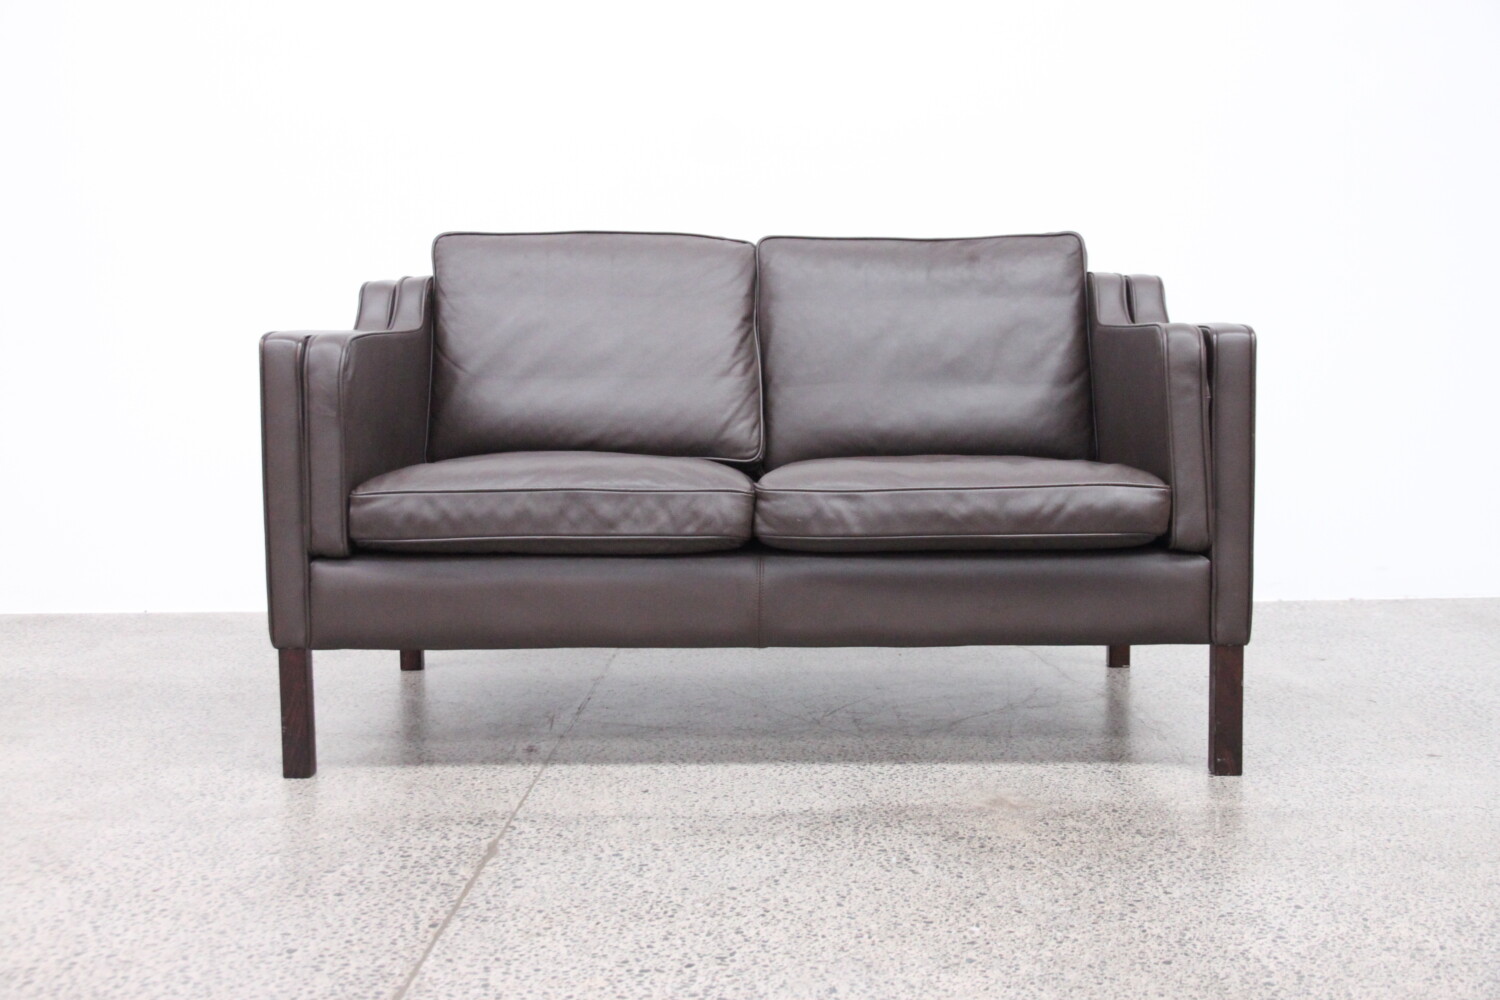 Pair of Brown Leather Sofas by Stouby